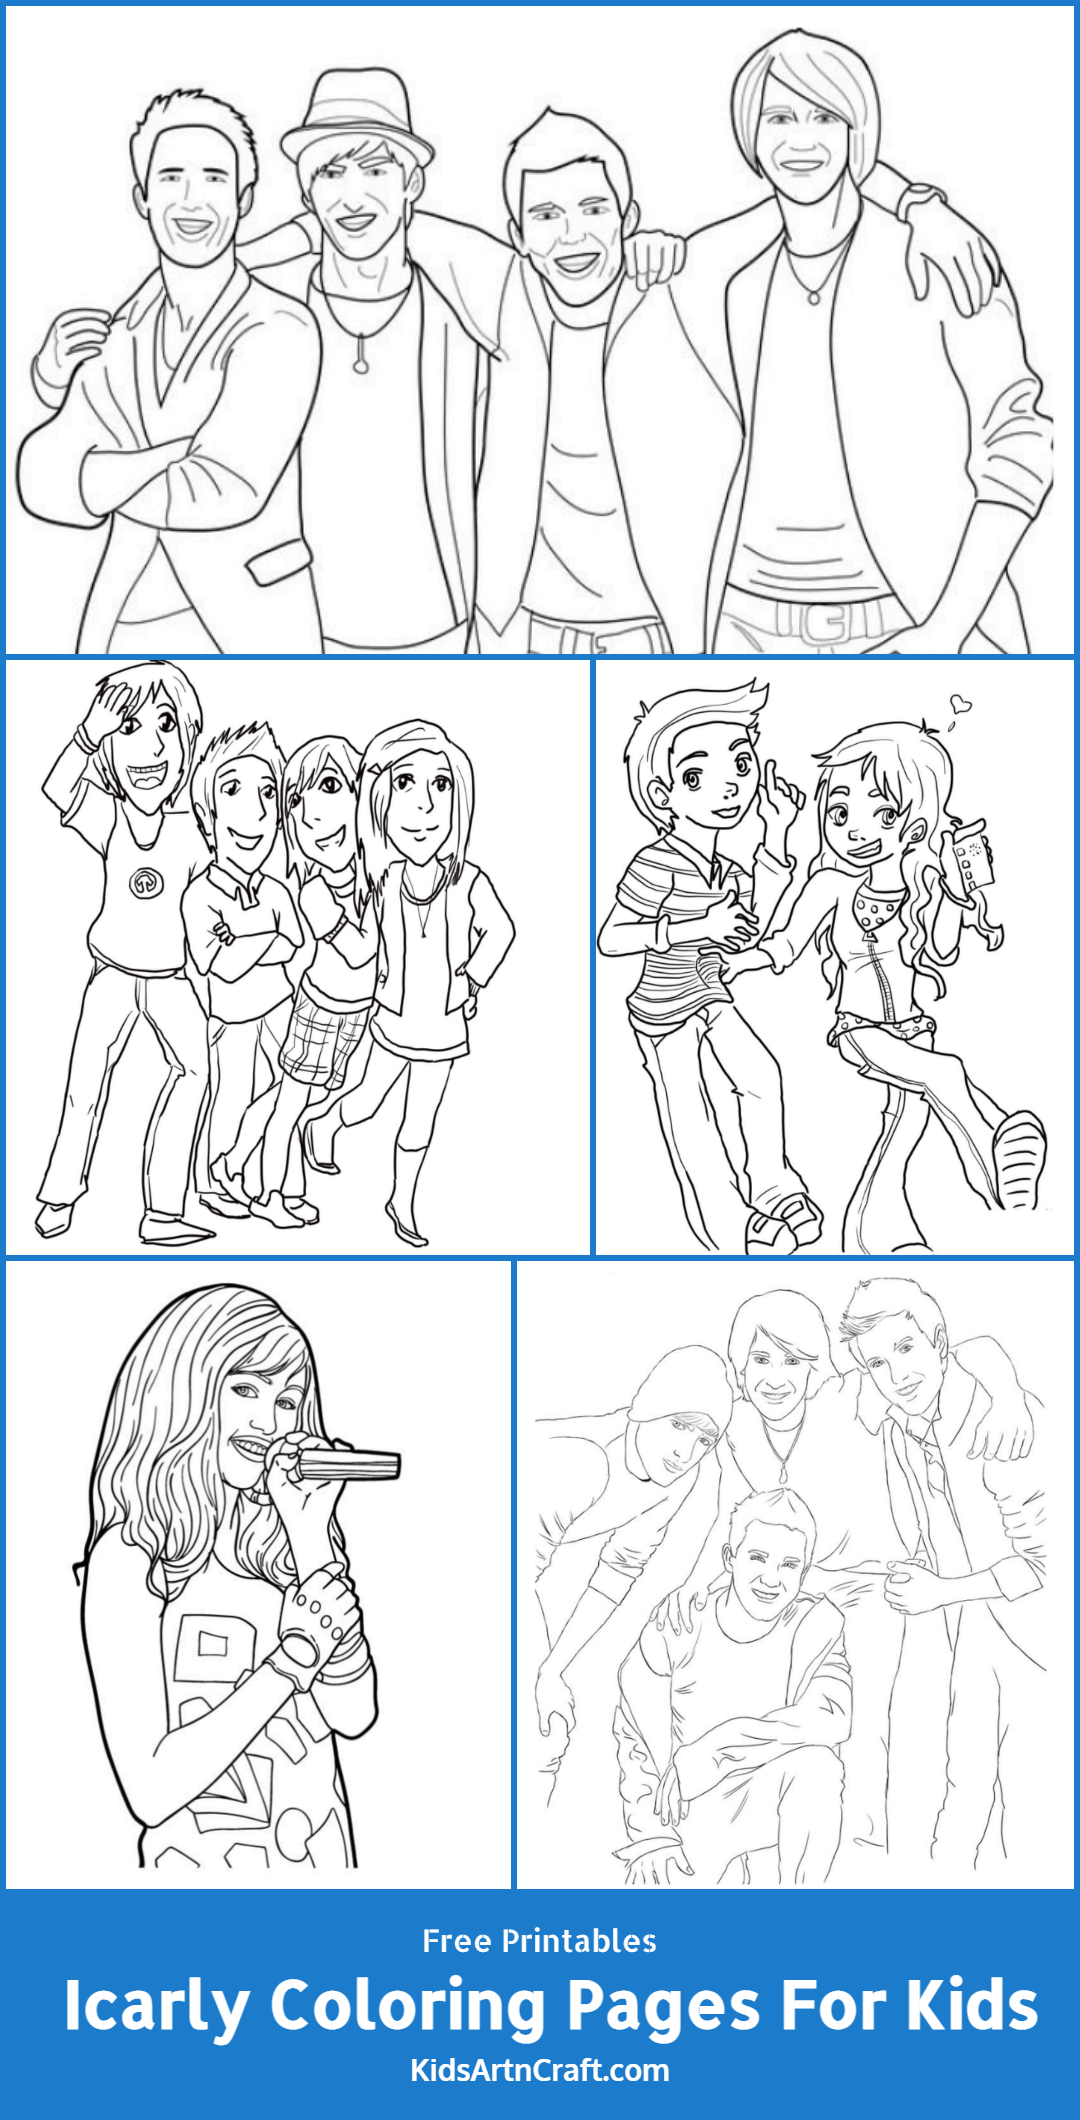 Icarly Coloring Pages For Kids – Free Printables